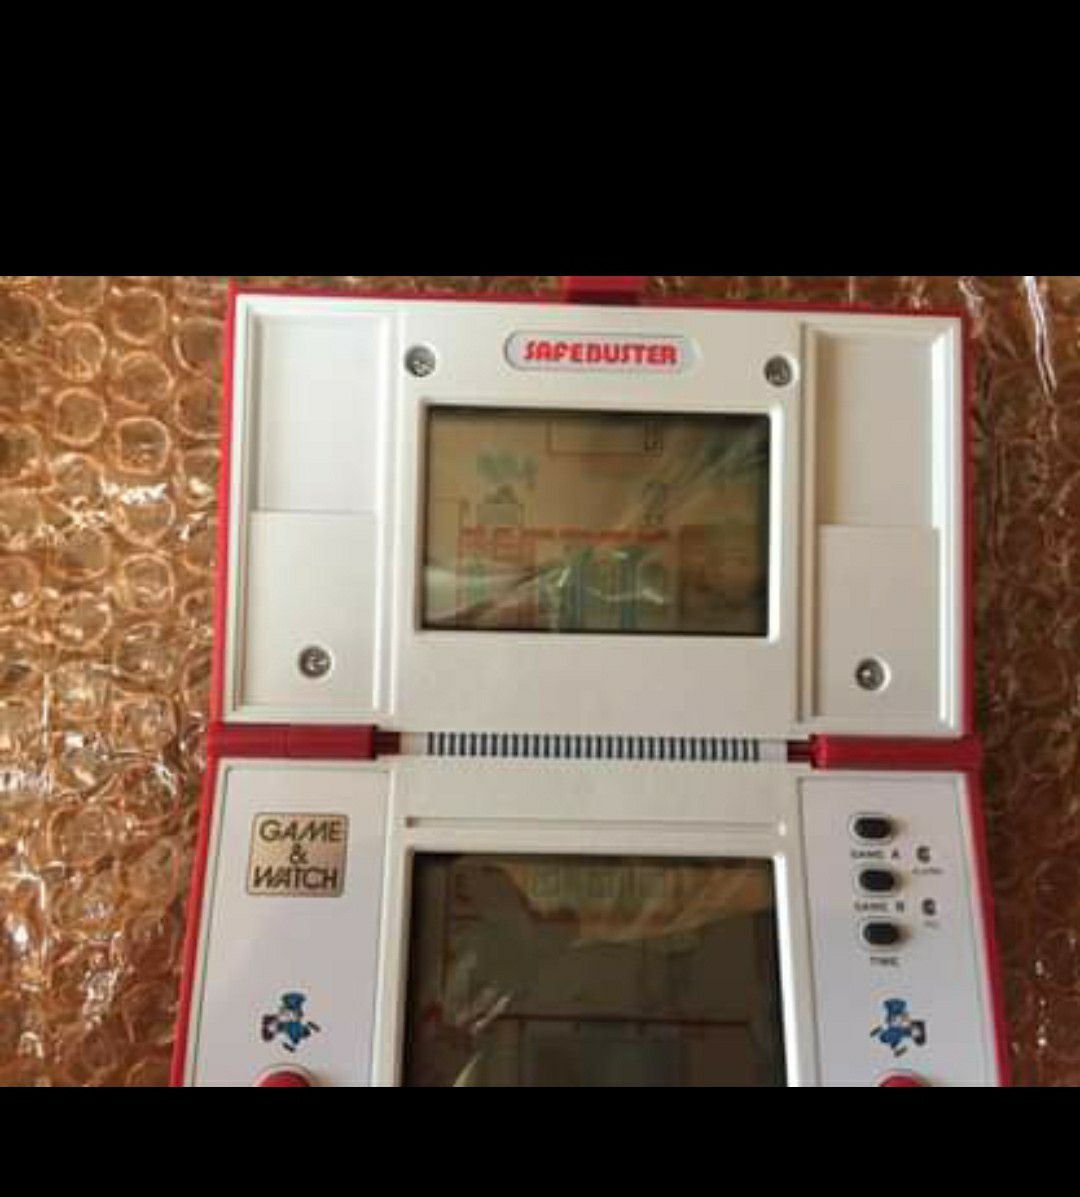 Safe buster .....game and watch